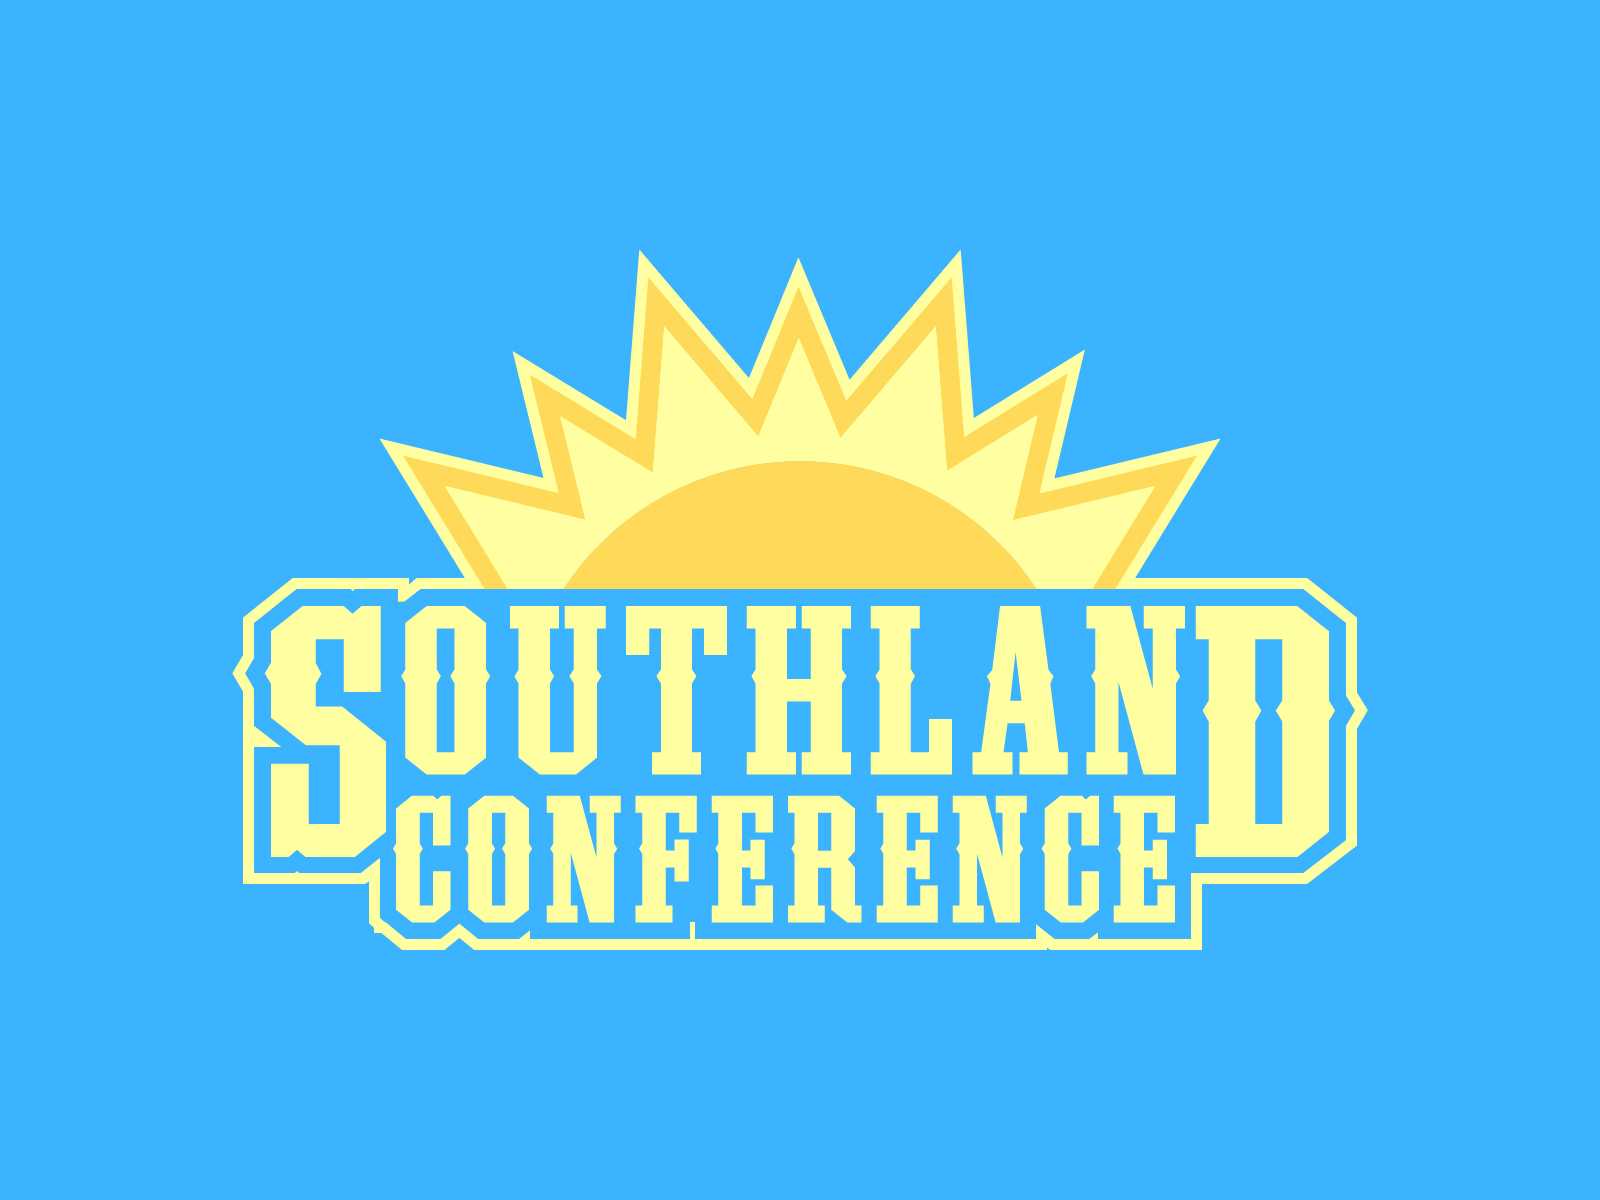 Southland Conference Logo Redesign by Anthony McInnis on Dribbble